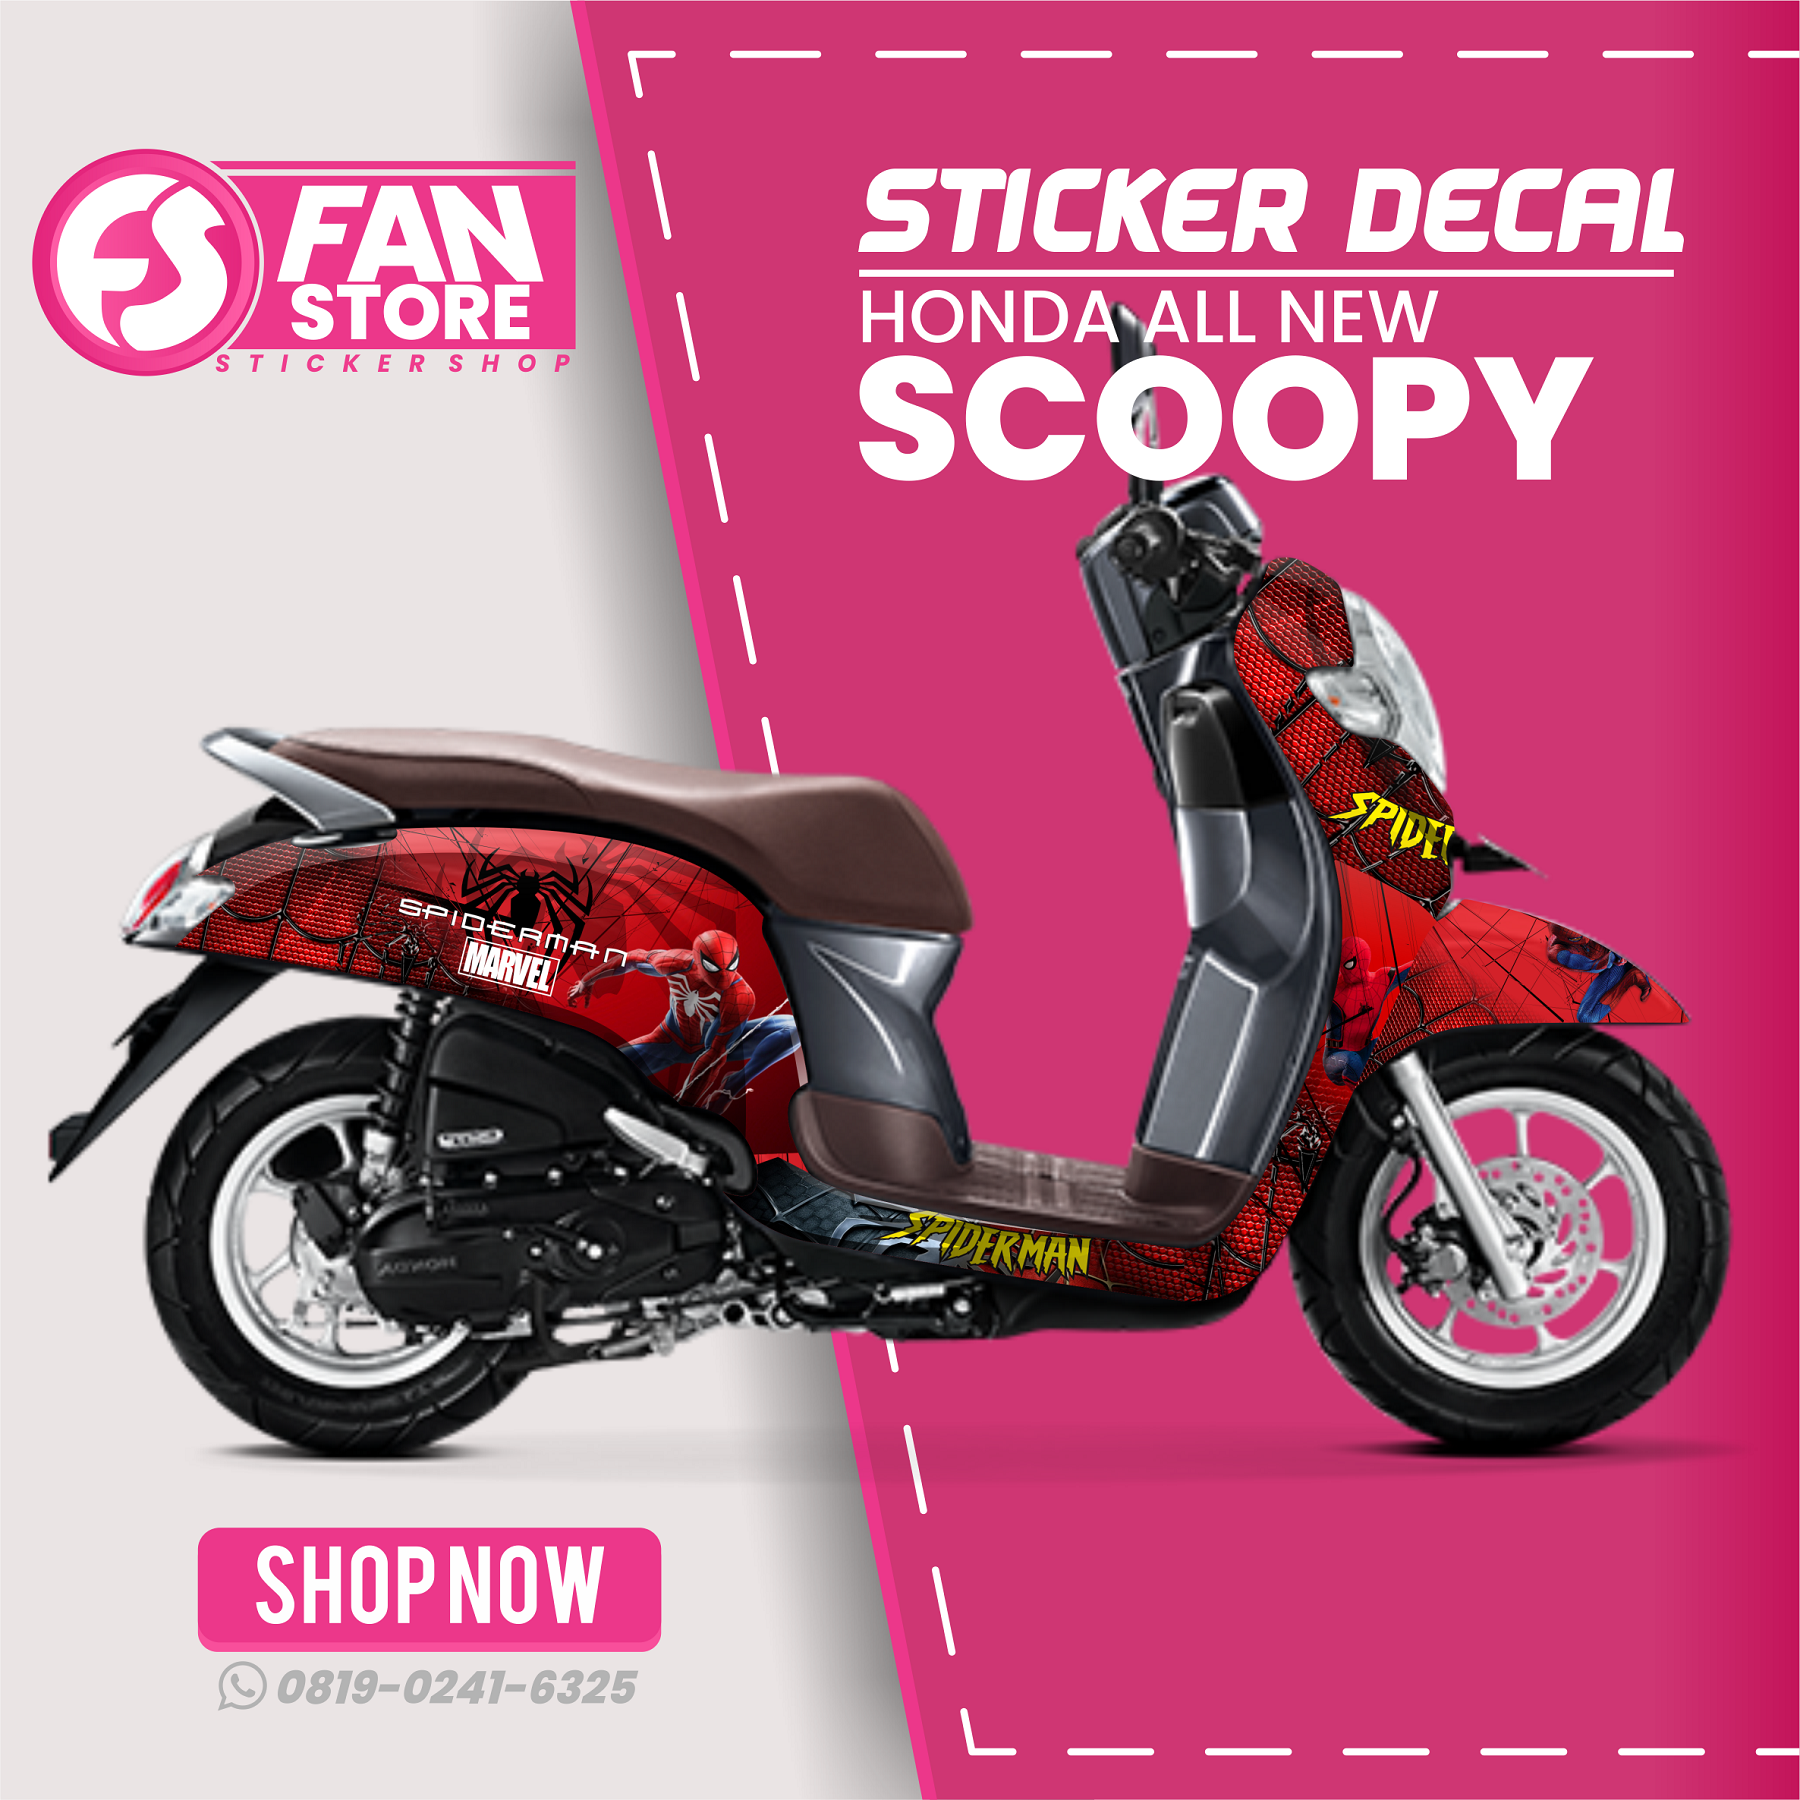 Sticker Decal Honda All New Scoopy Full Body SPIDERMAN Decal Motor Scoopy Fullbody Lazada Indonesia